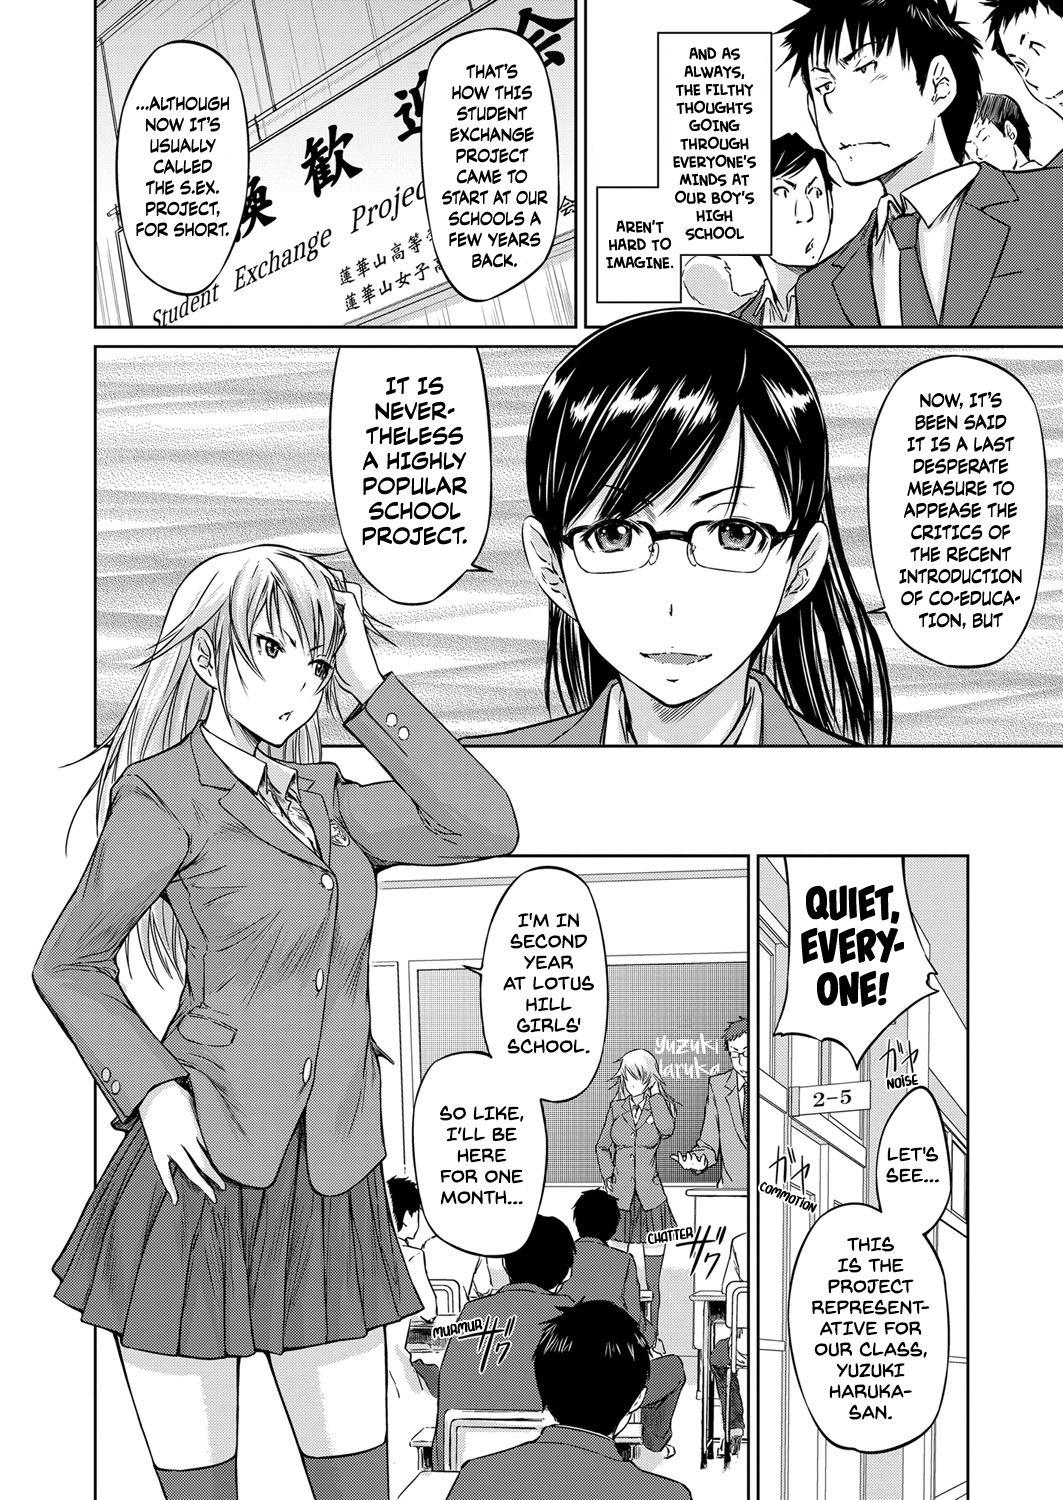 Wife Seitou Koukan no Susume | Student Exchange Recommendation Hard - Page 2